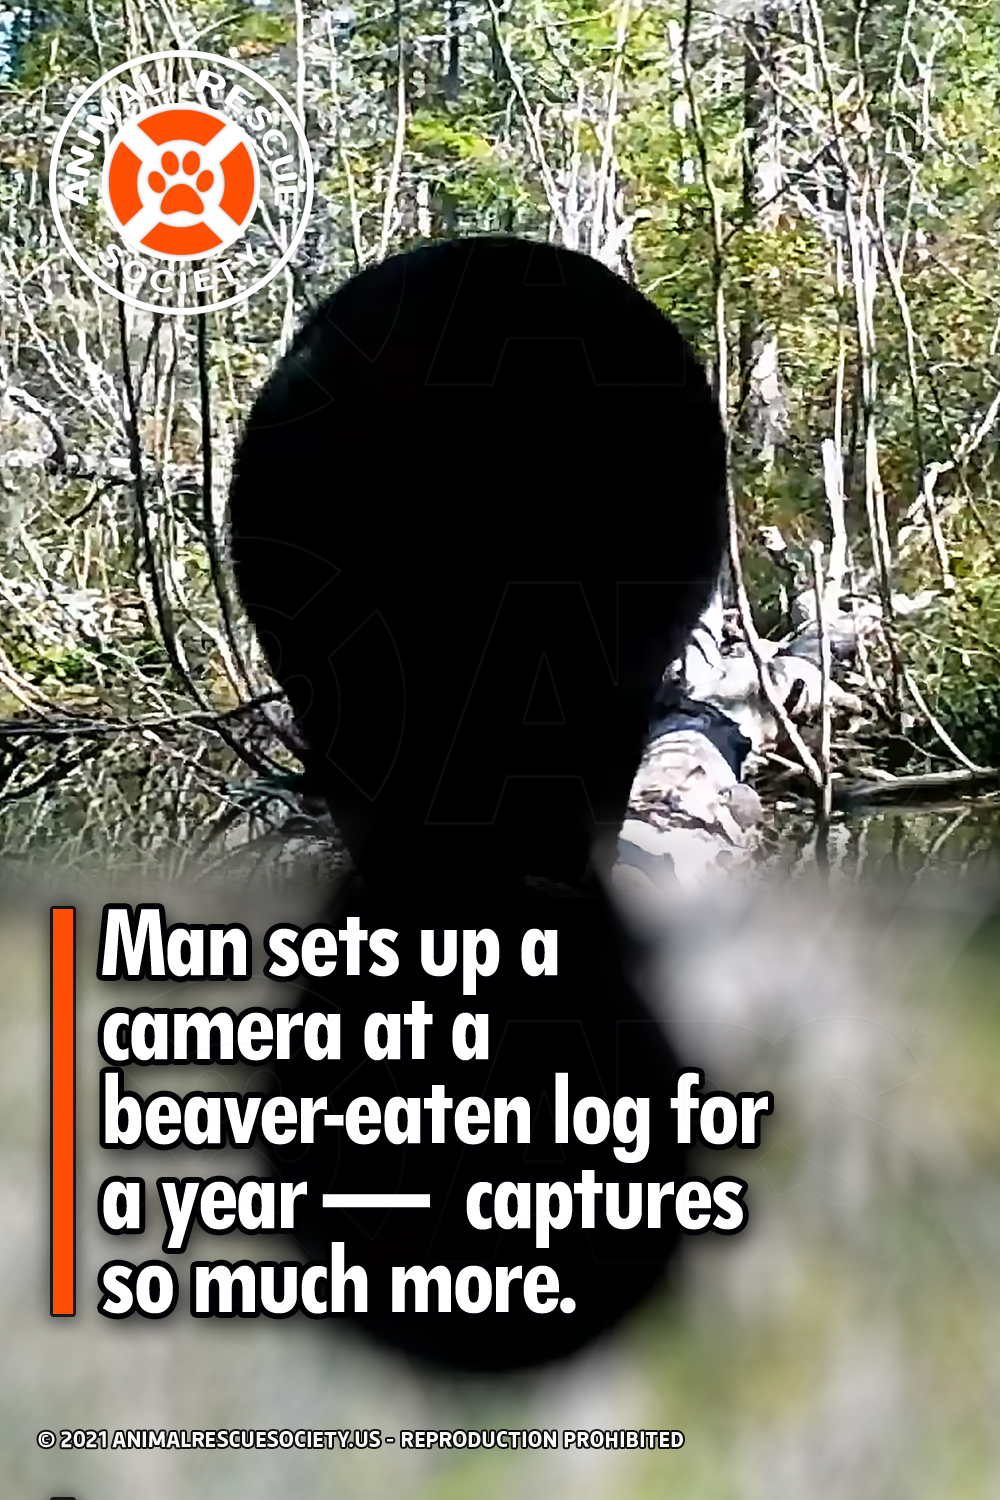 Man sets up a camera at a beaver-eaten log for a year —  captures so much more.